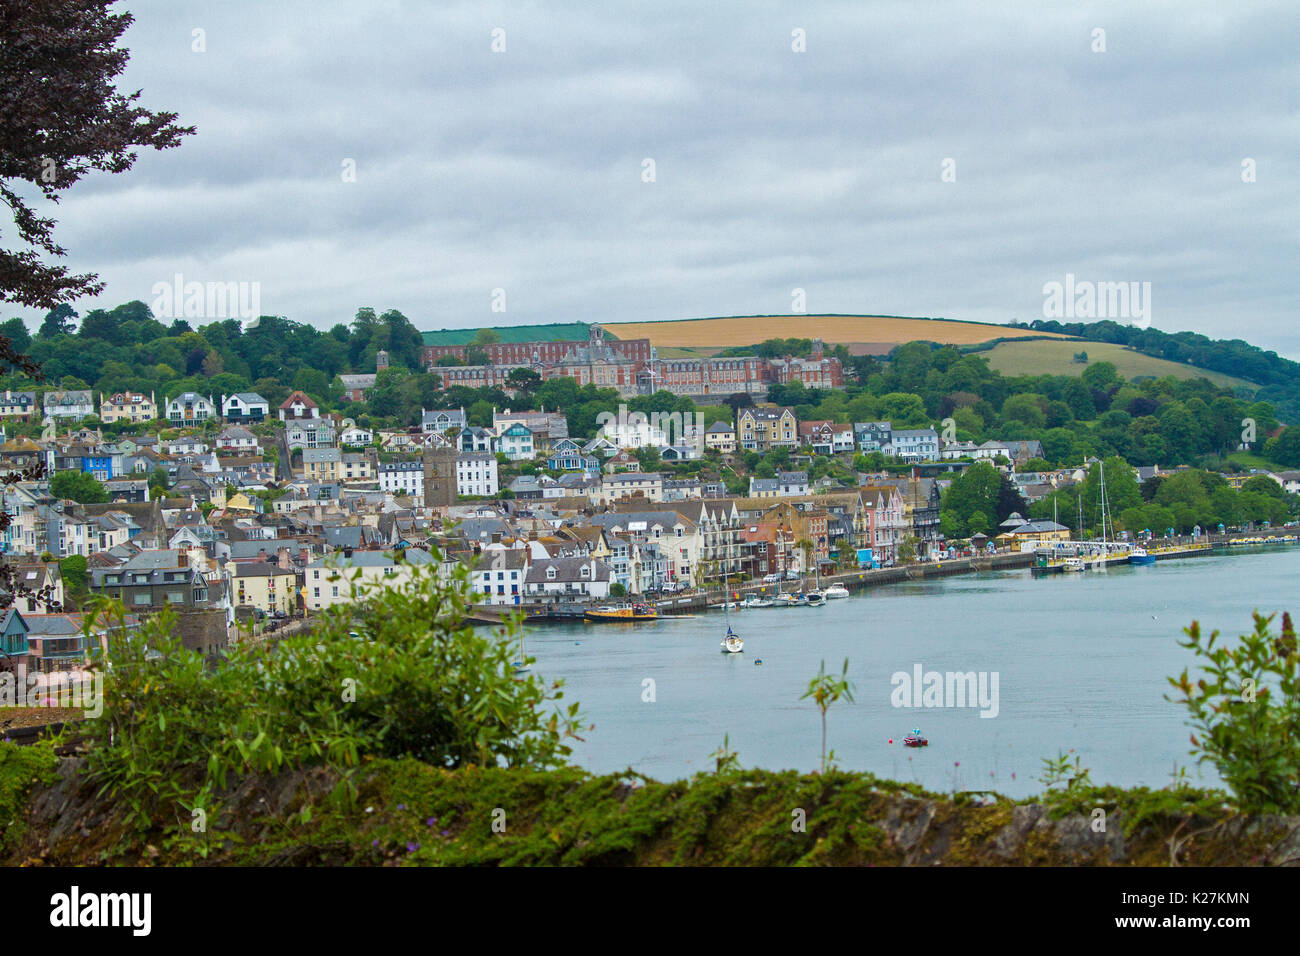 Coastal town of Dartmouth with houses crammed on tree-cloaked hillside rising above harbour dotted with boats in Devon, England Stock Photo